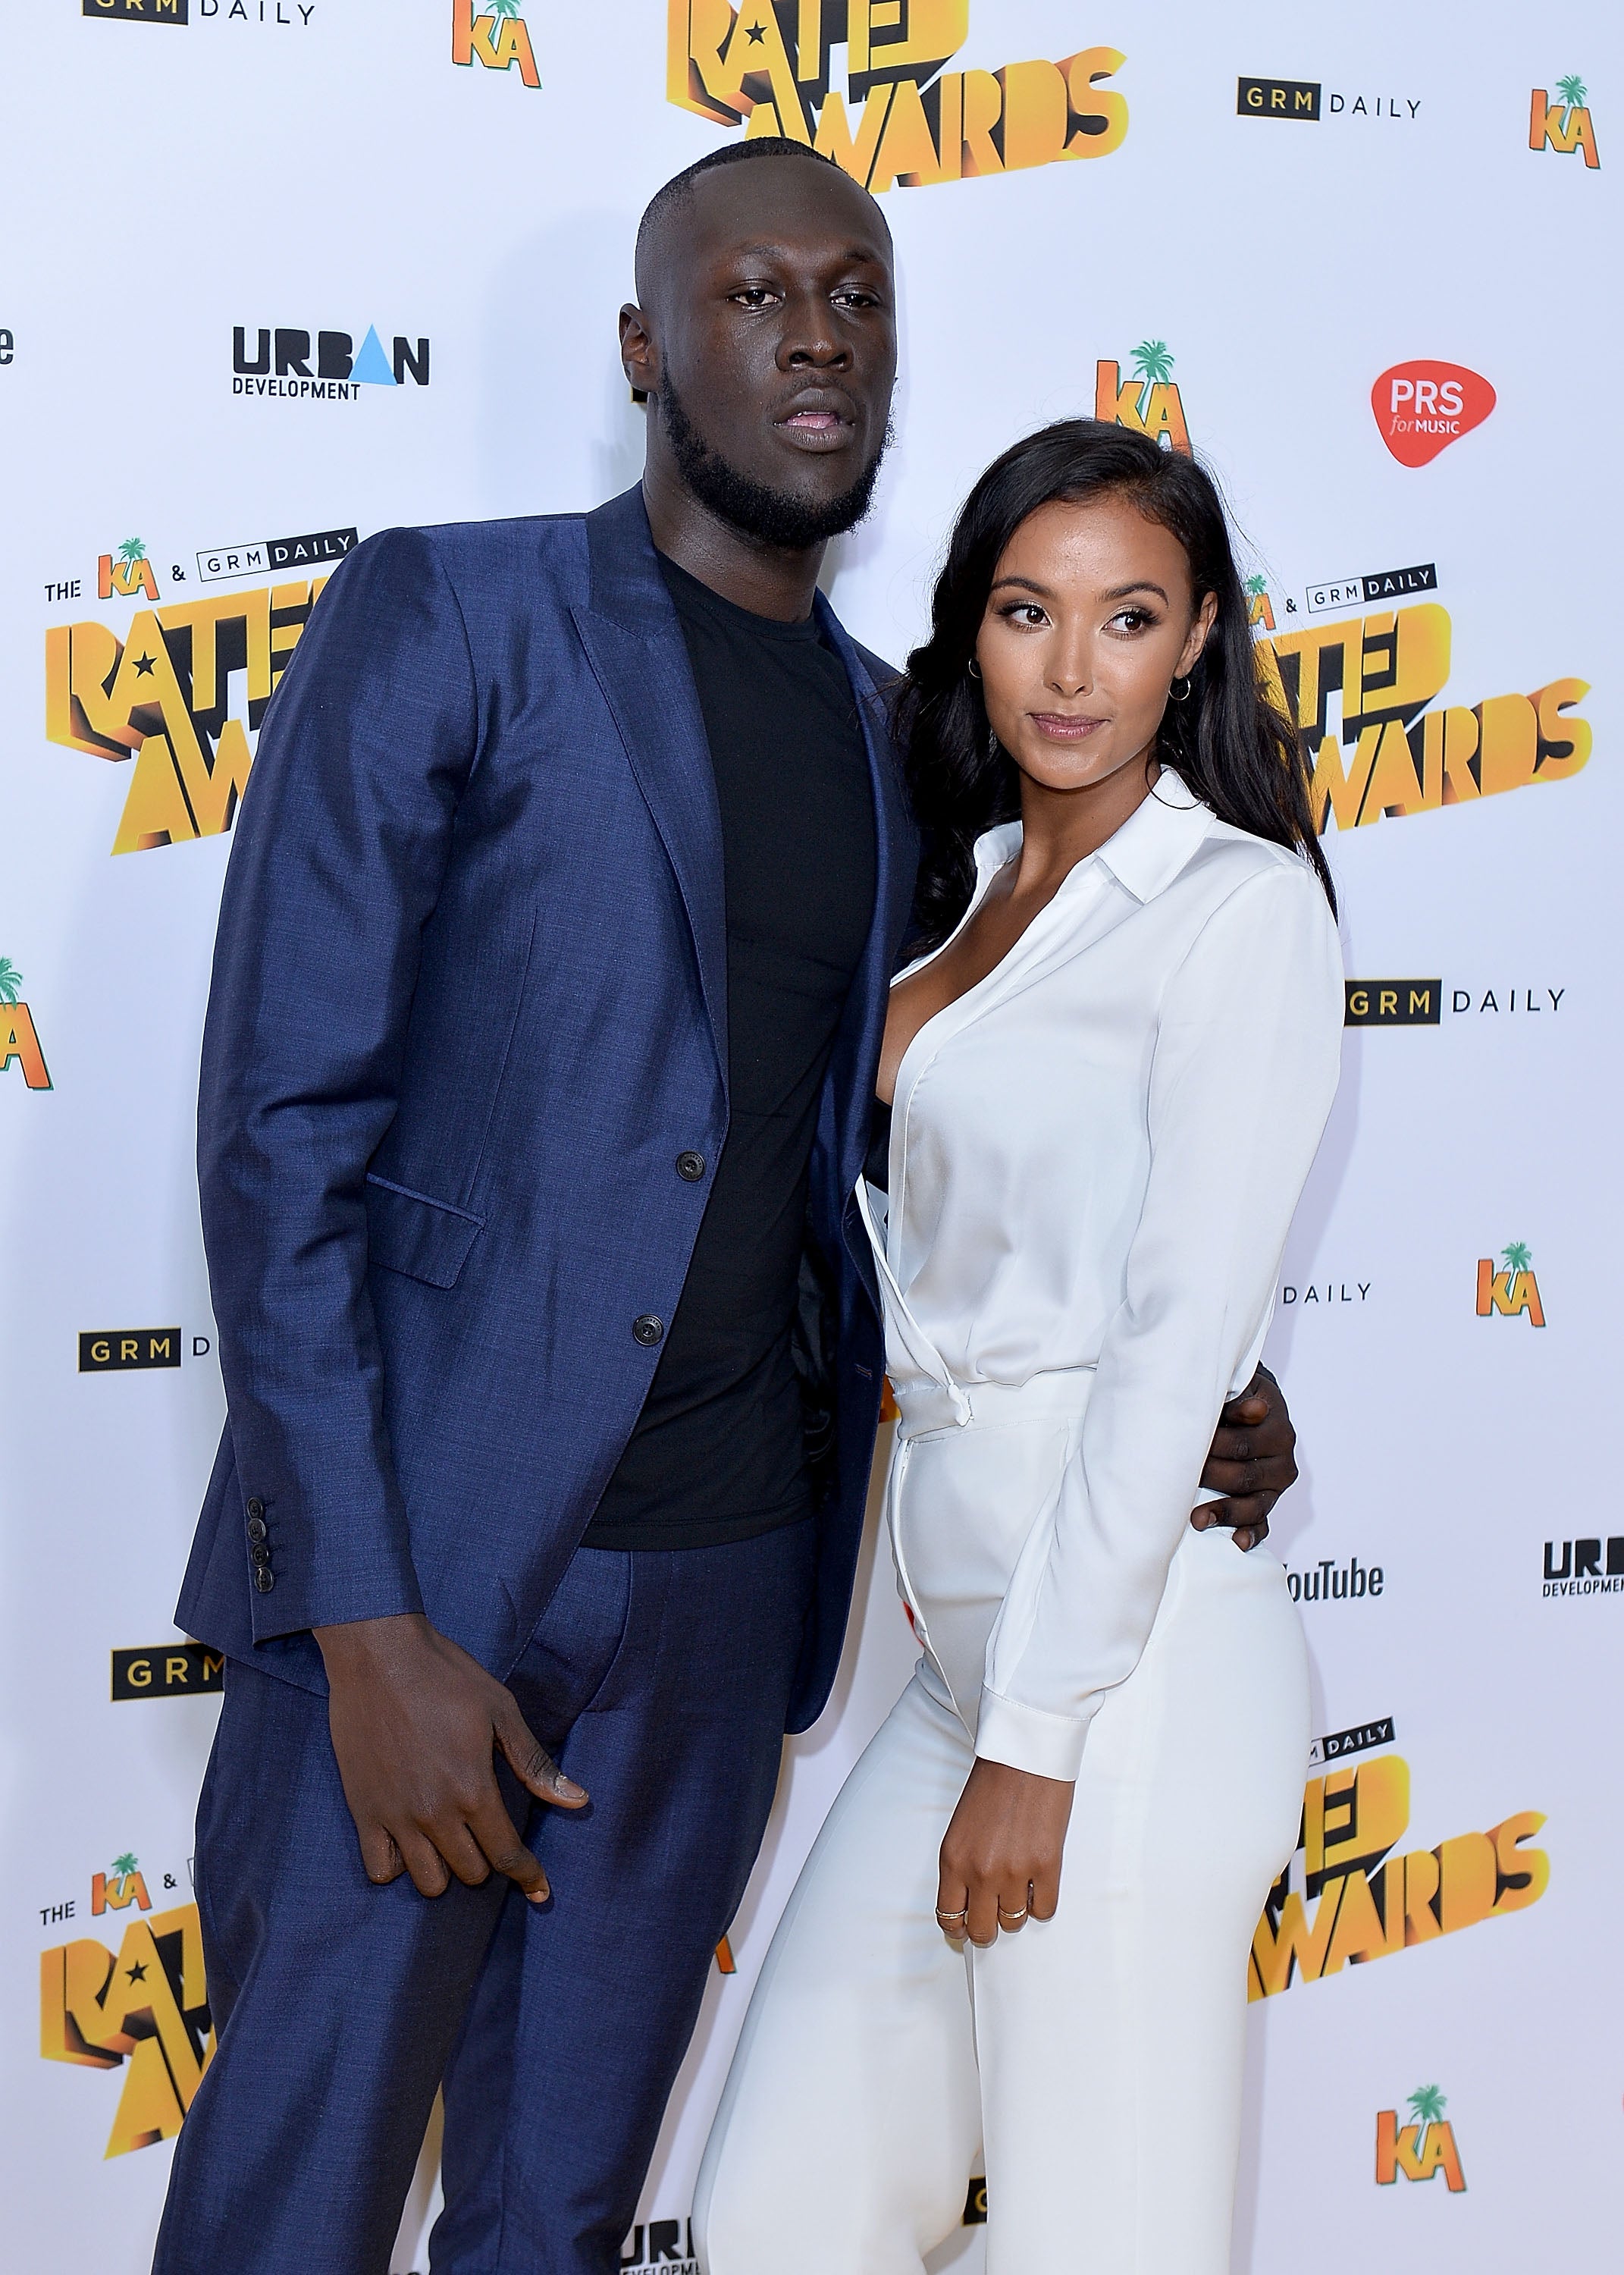 Stormzy and Maya Jama attend The Rated Awards at The Roundhouse on October 24, 2017